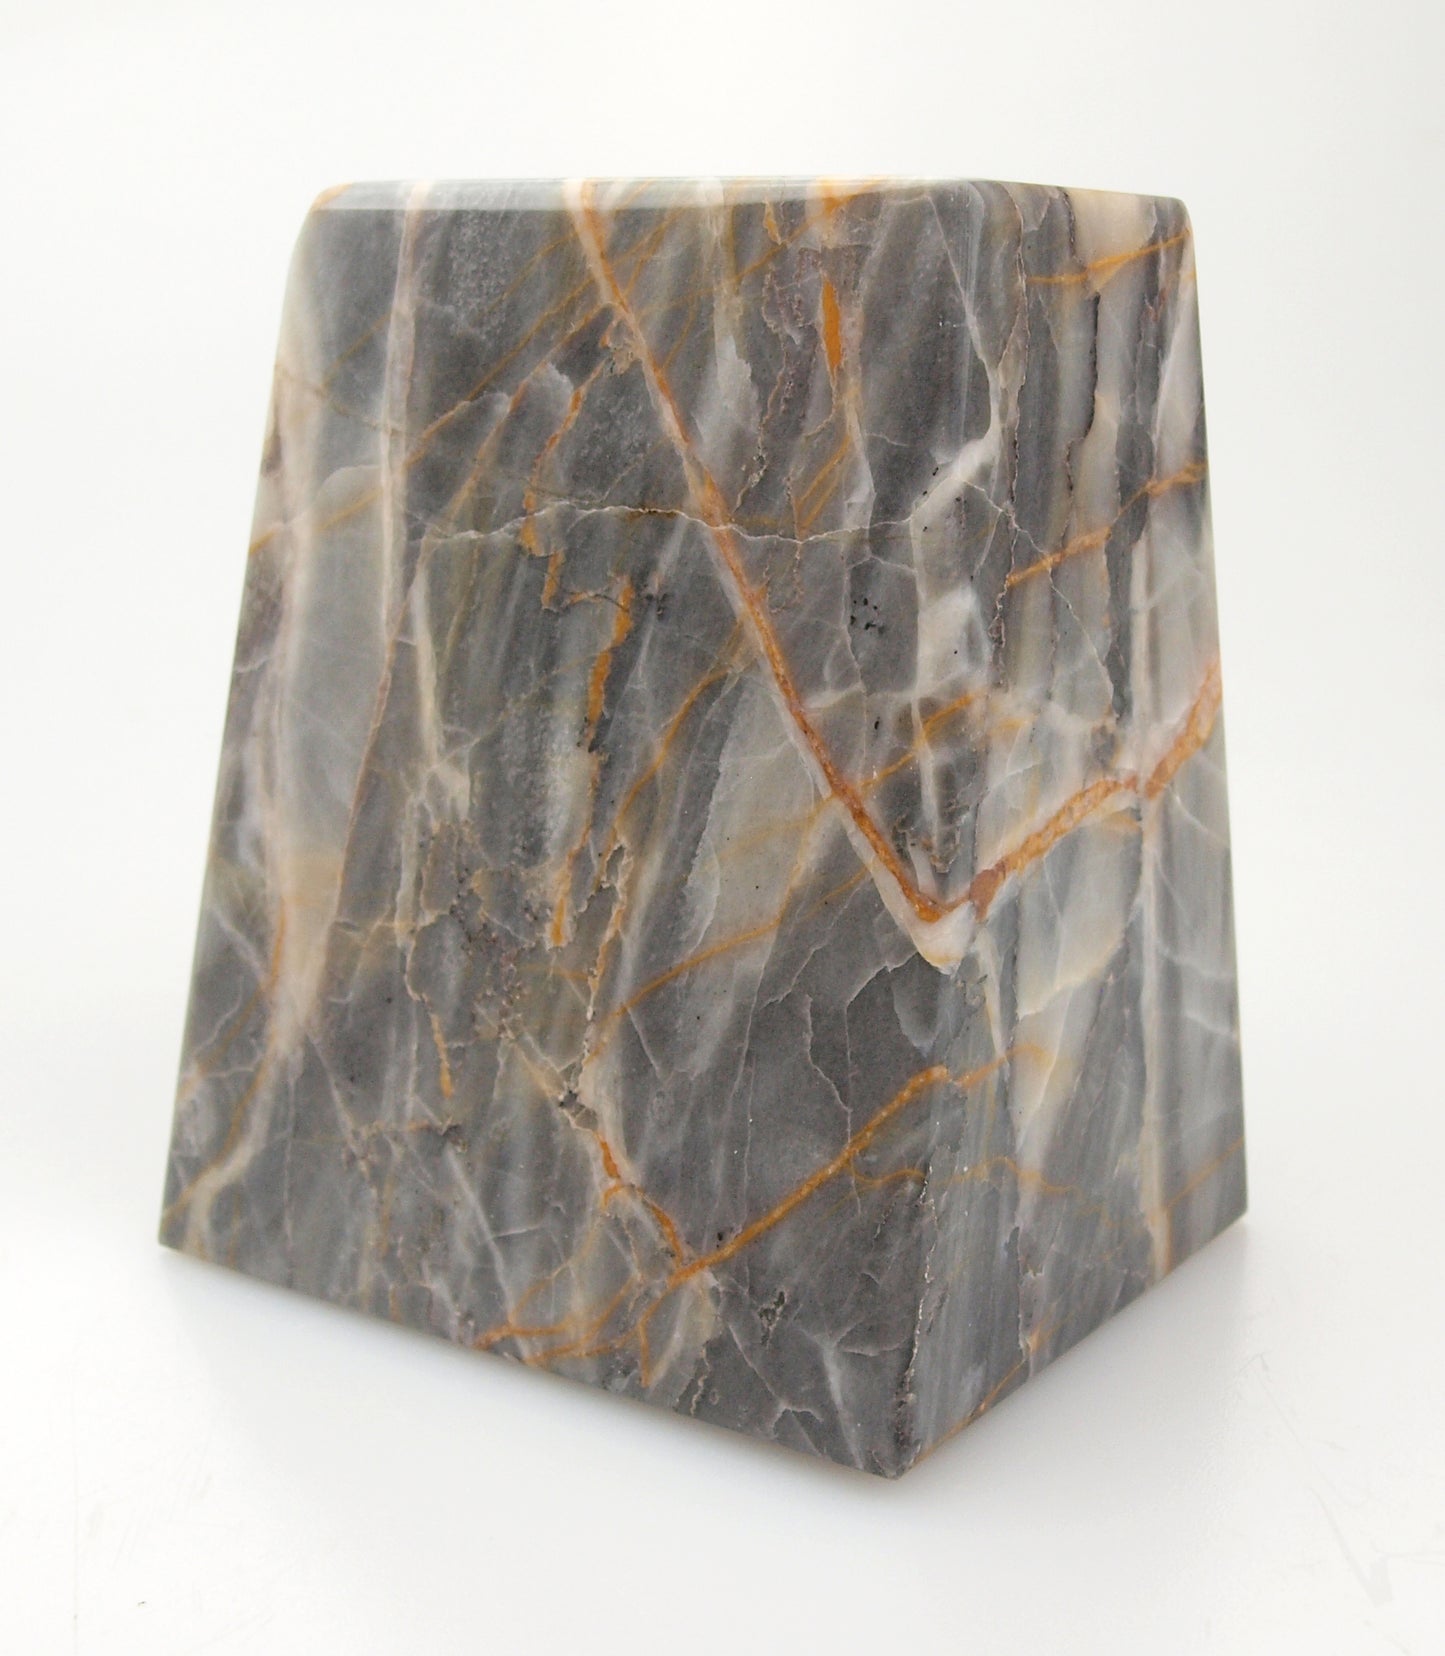 Paperweight made of marble interwoven with calcite veins